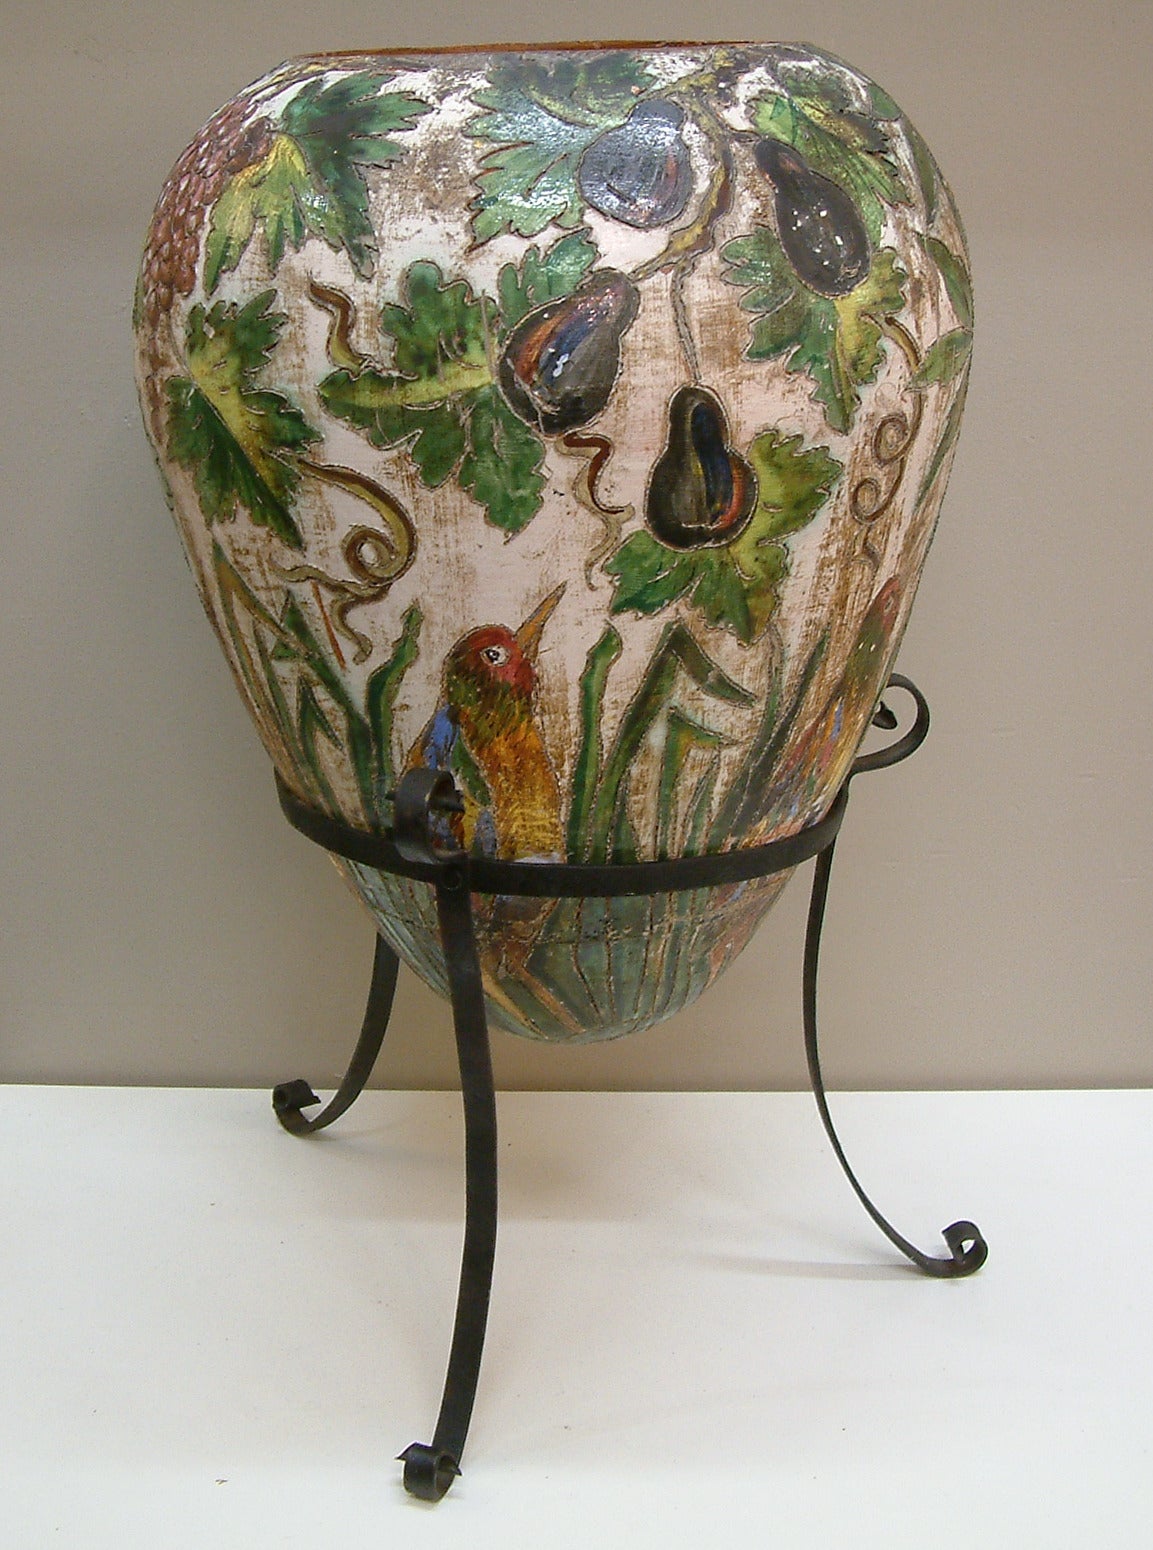 A very large and whimsical terracotta vase depicting birds, oranges, figs, pomegranates and grapes incised on a hi-glaze ground seated in a hand-forged and riveted iron frame.  Beautiful saturated color and detailing throughout.  The piece has an